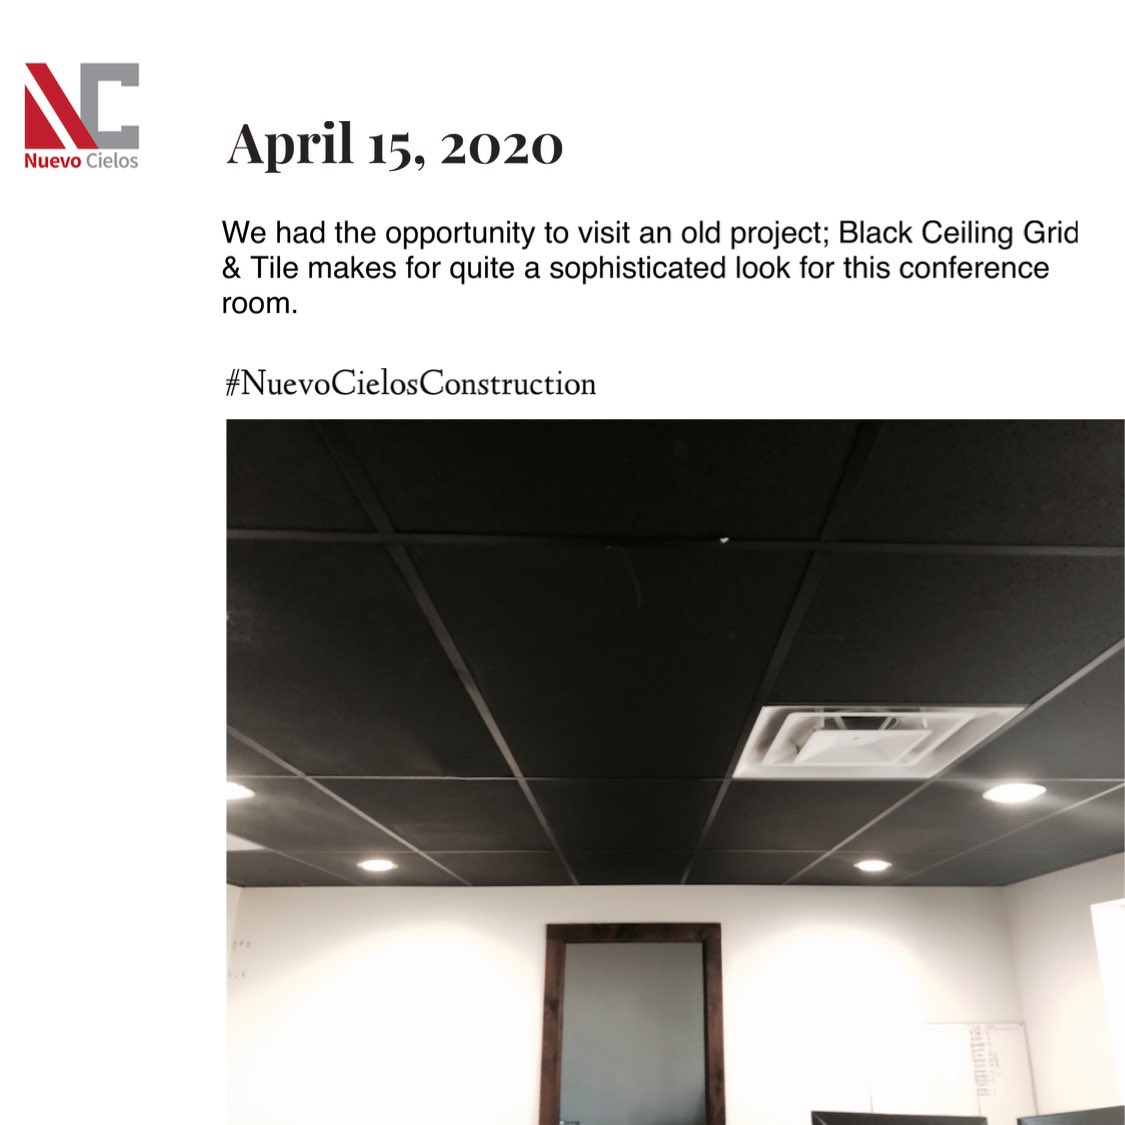 We tend to change it up from your common white ceiling grid and tile to something more elegant. 
#NuevoCielos #construction #commercialconstruction #ceilinggrid #dropceiling #acousticalceilings #blackonblack #texasconstruction #midland #smallbusiness